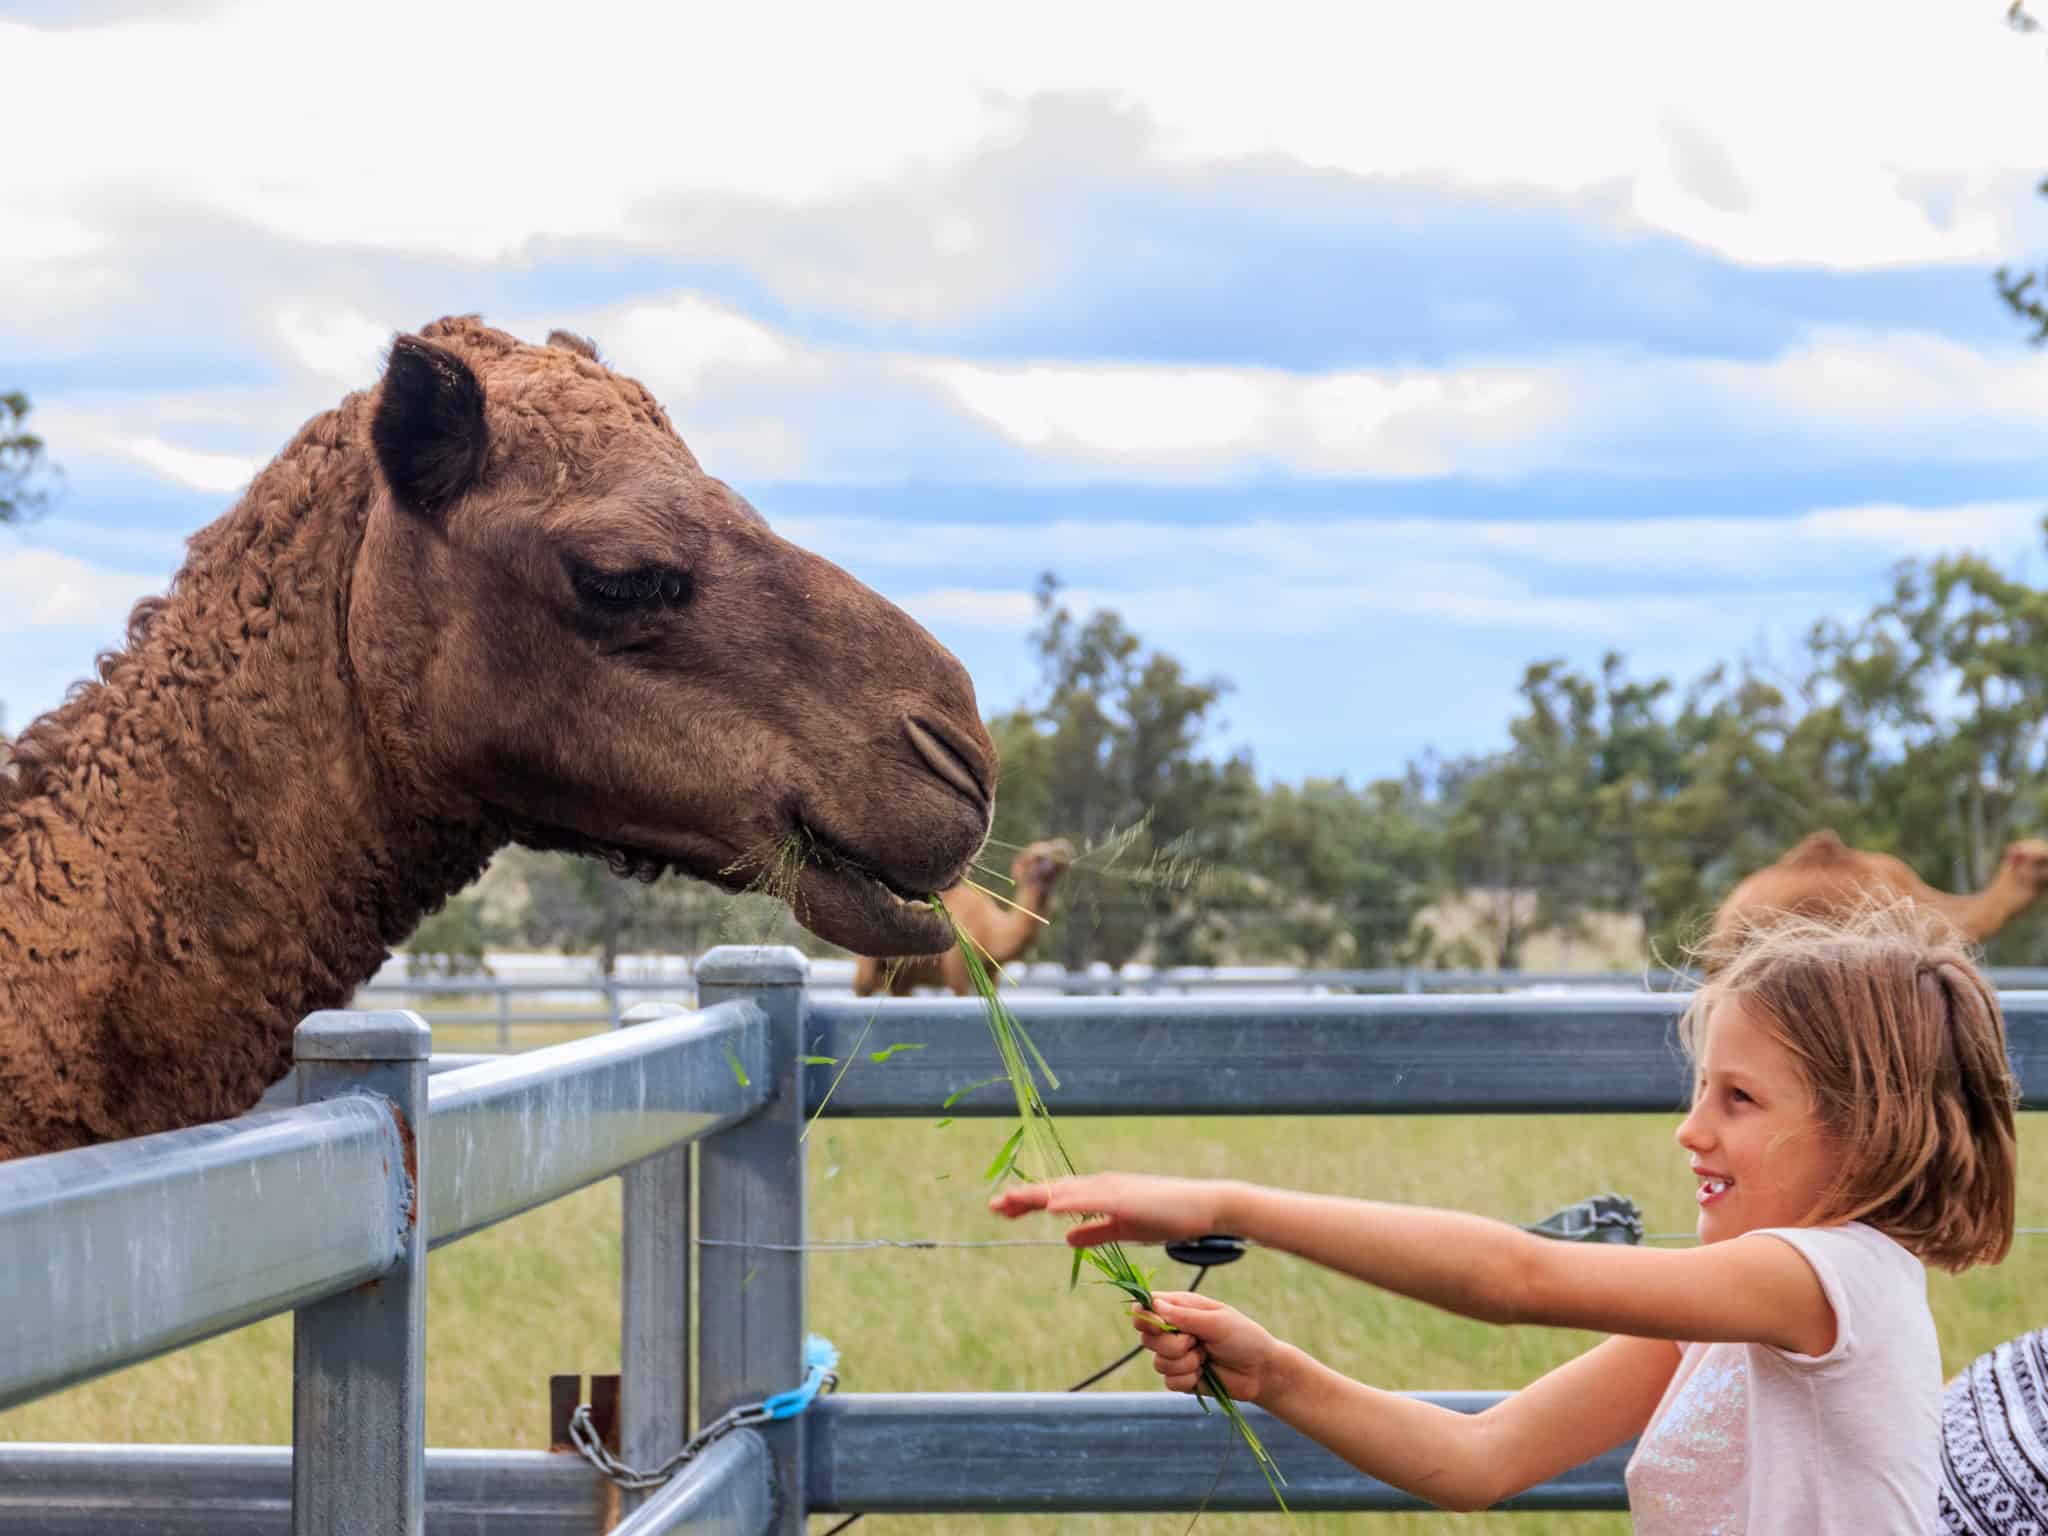 Get hands-on with the gentle camels at Summer Land Camel Farm